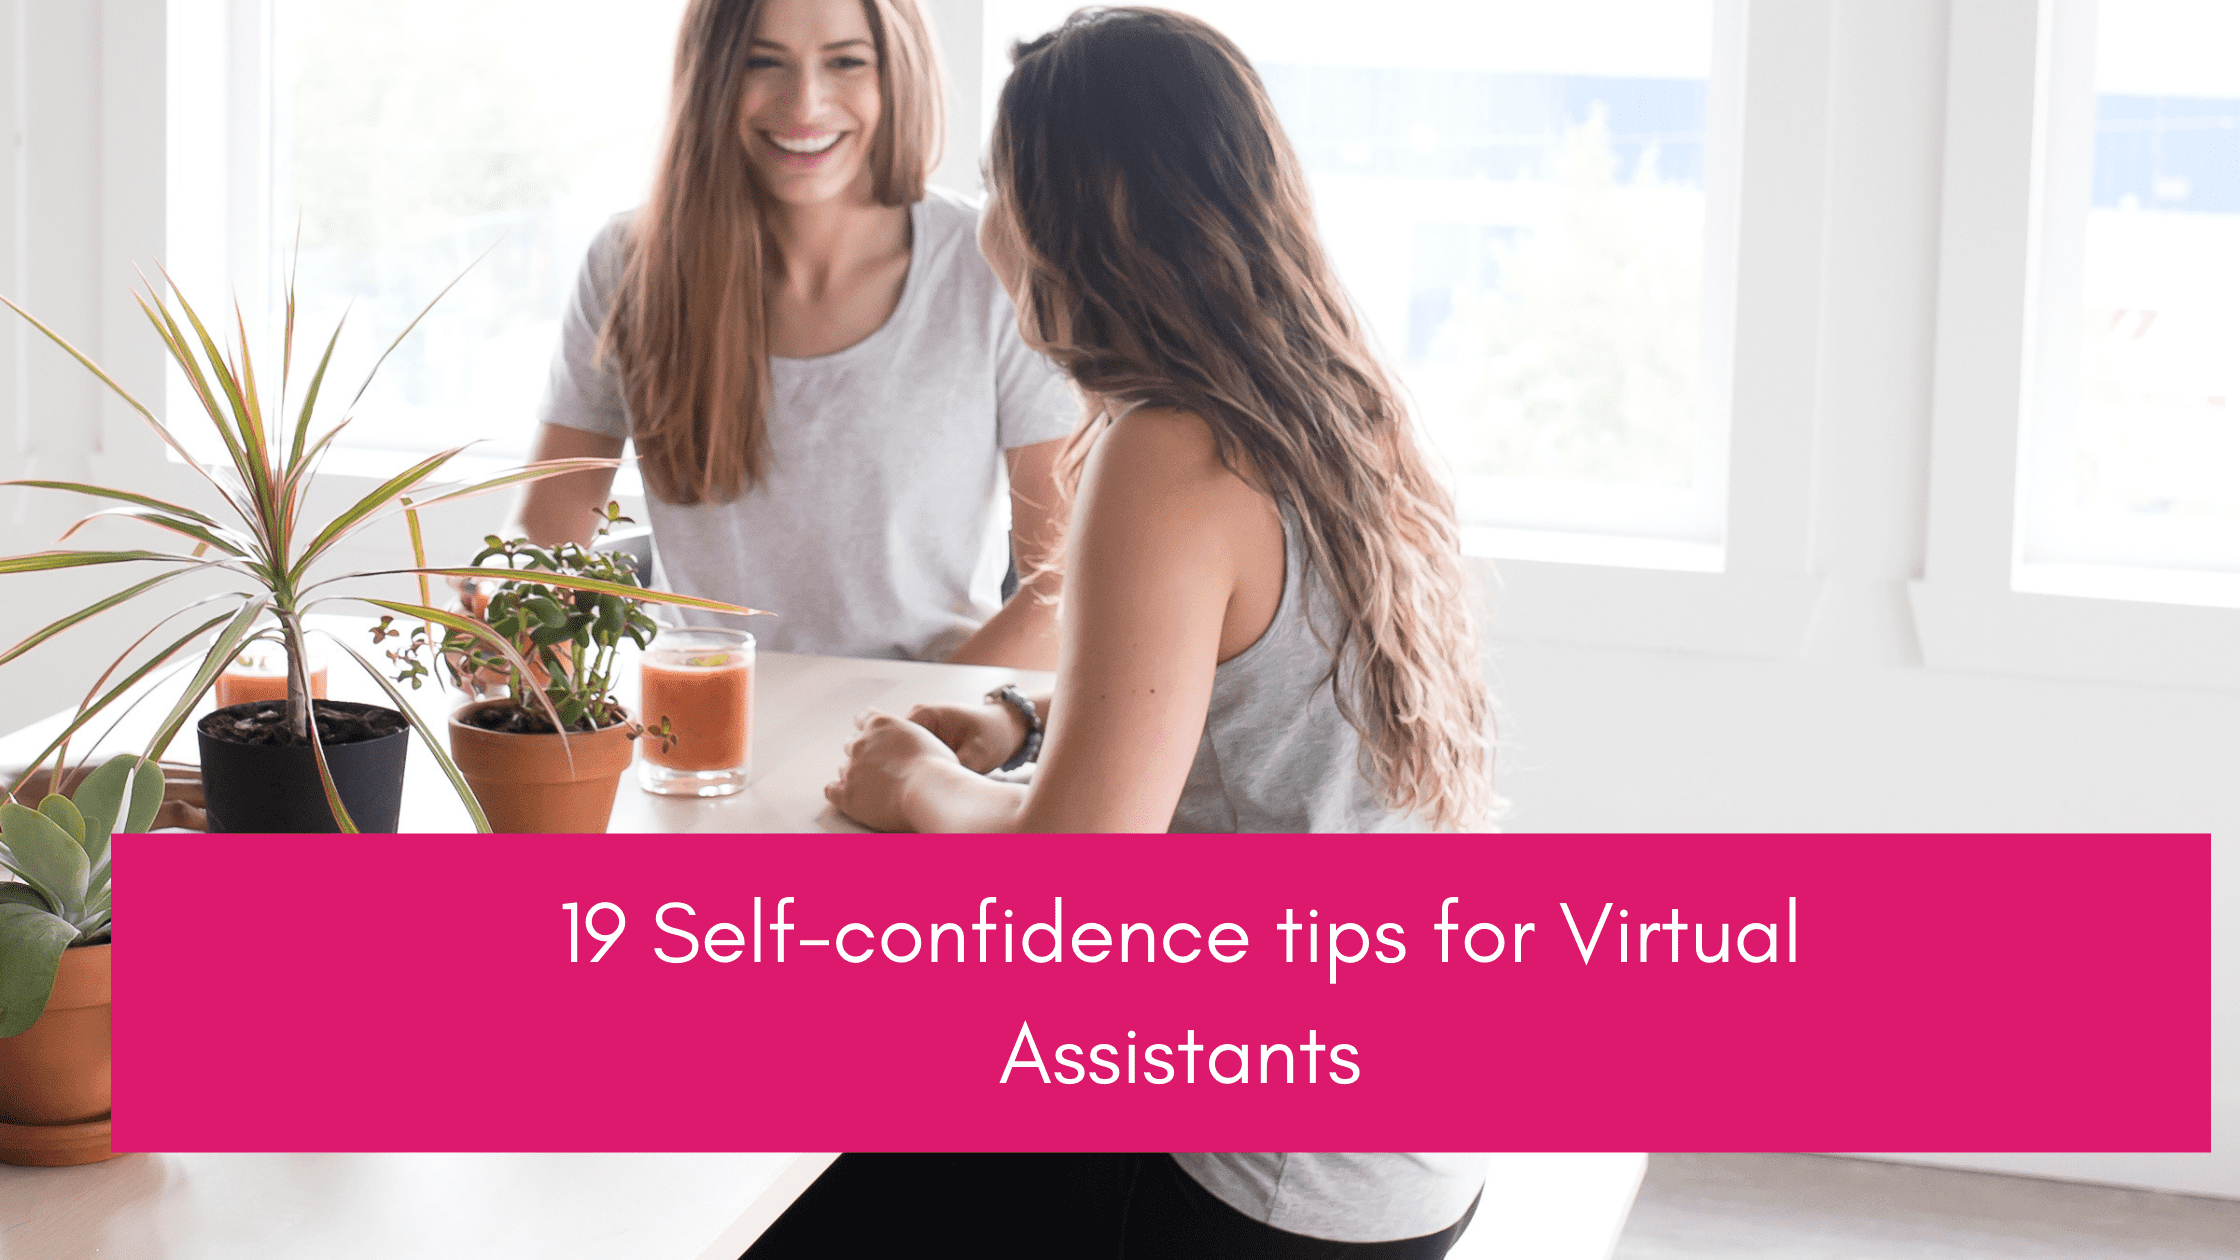 self confidence tips